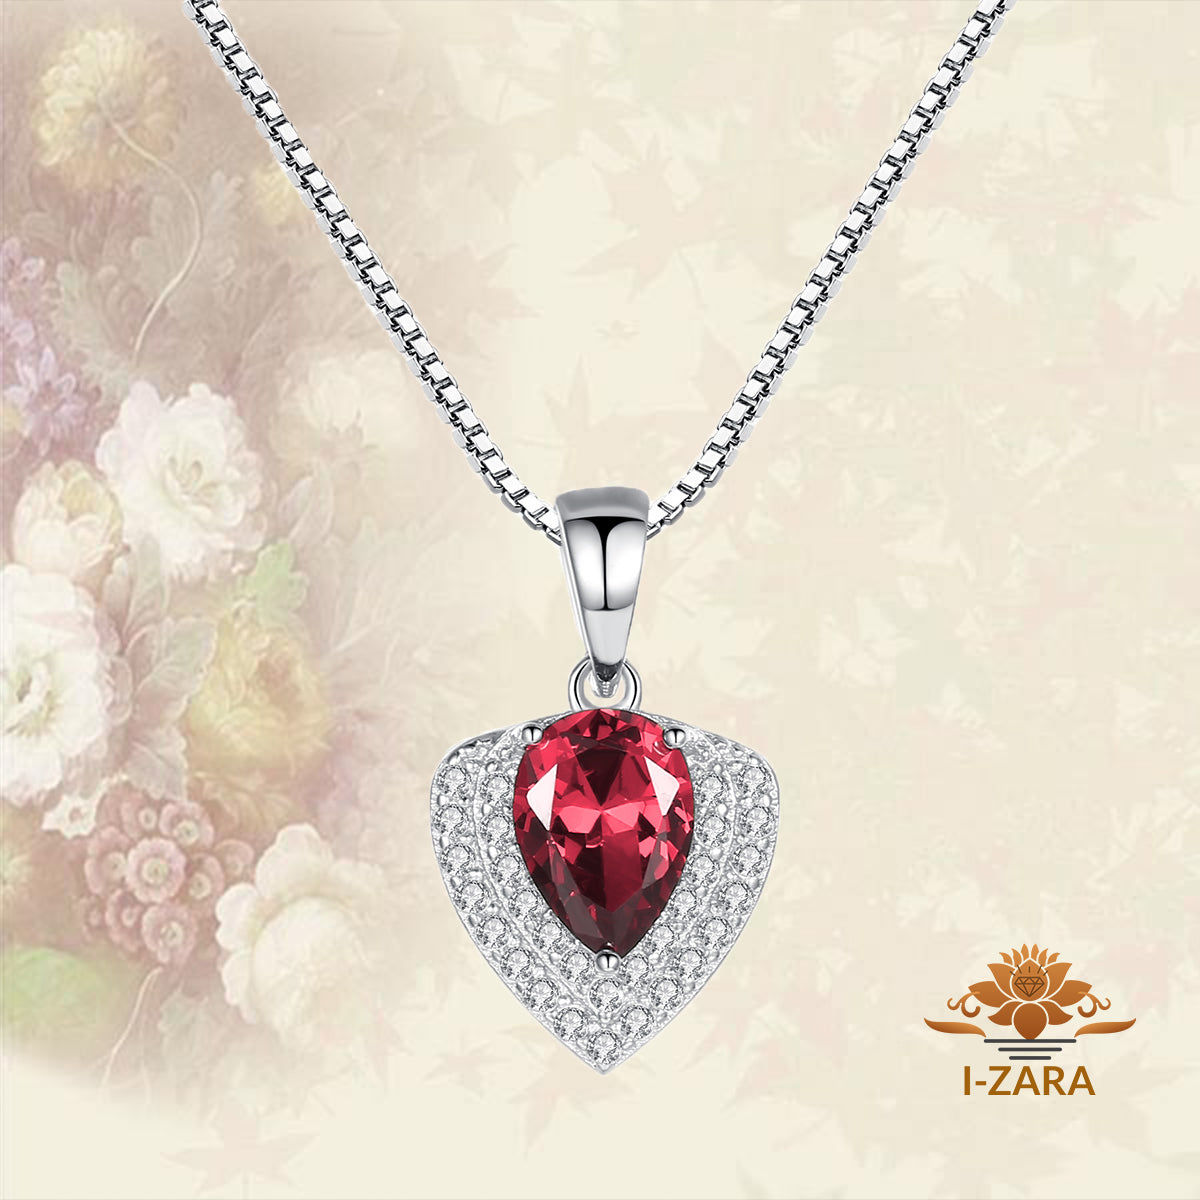 Women's Classic Rhodium Plated Pear Heart Ruby Gemstone Necklace